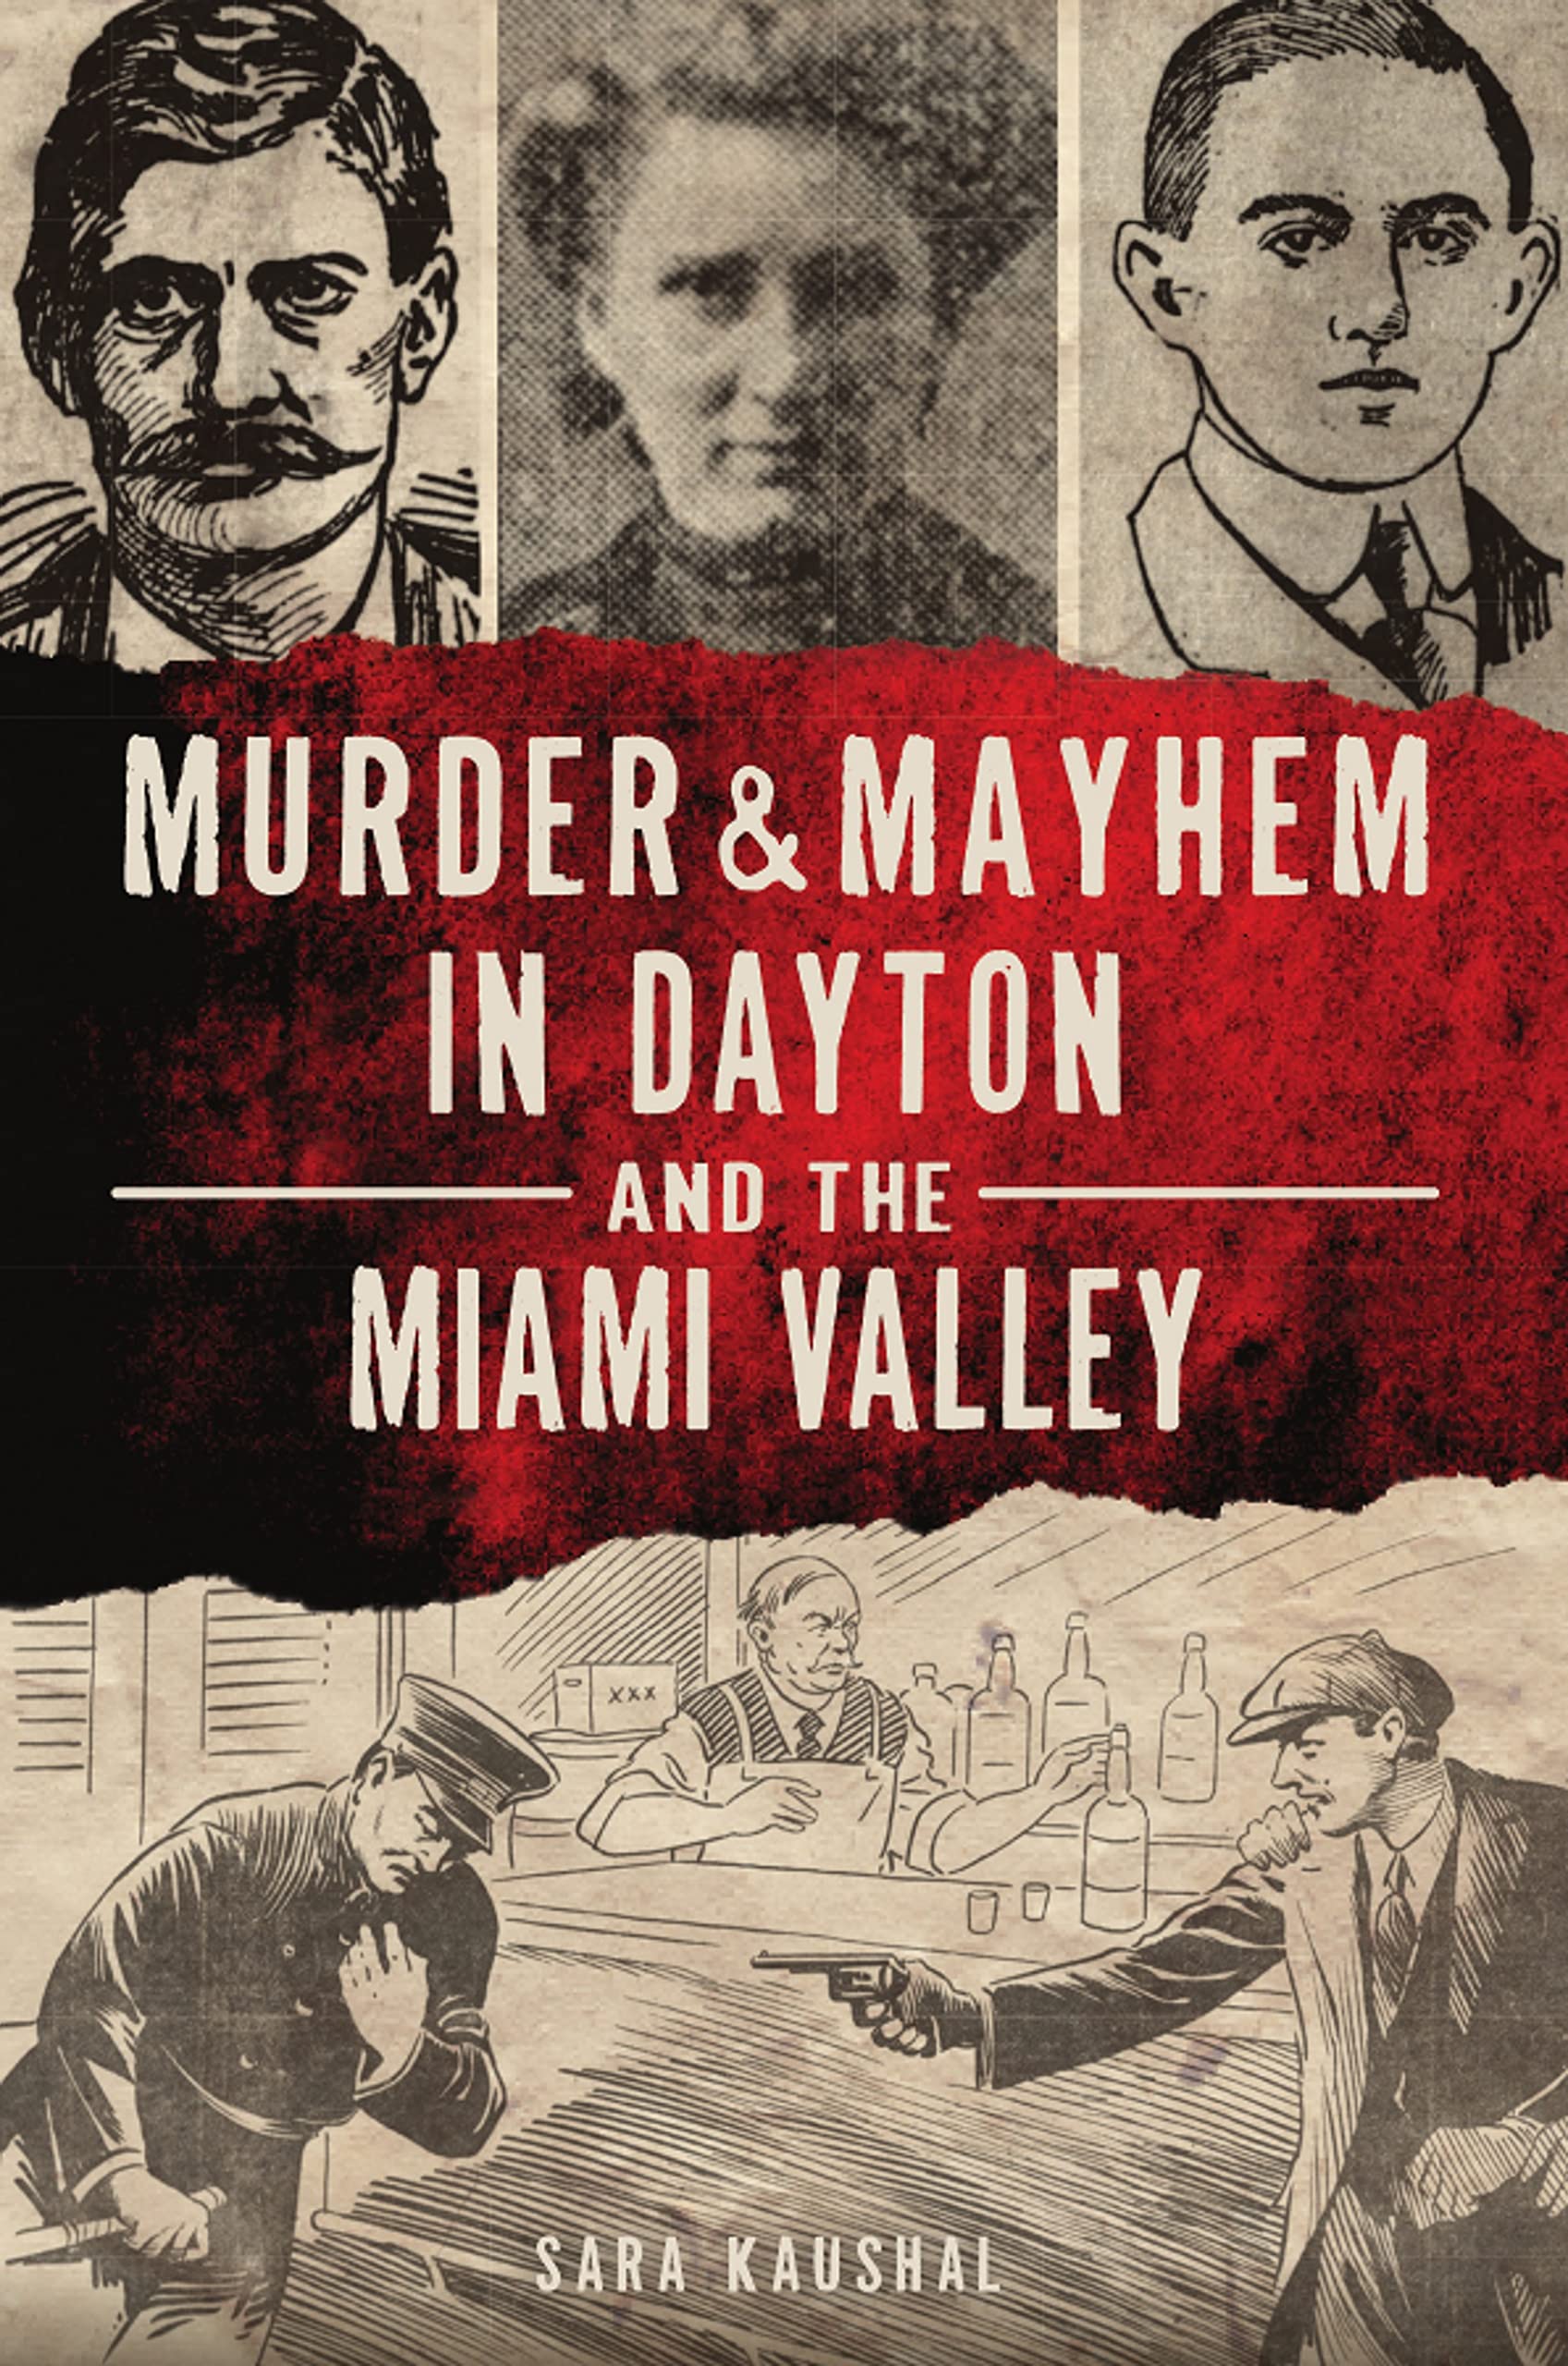 Book cover with old timey mugshots and suspect sketches at the top, the title of the book murder and mayhem in the dayton and miami valley in the center in large letters, and a drawing of a mobster shooting a policeman.